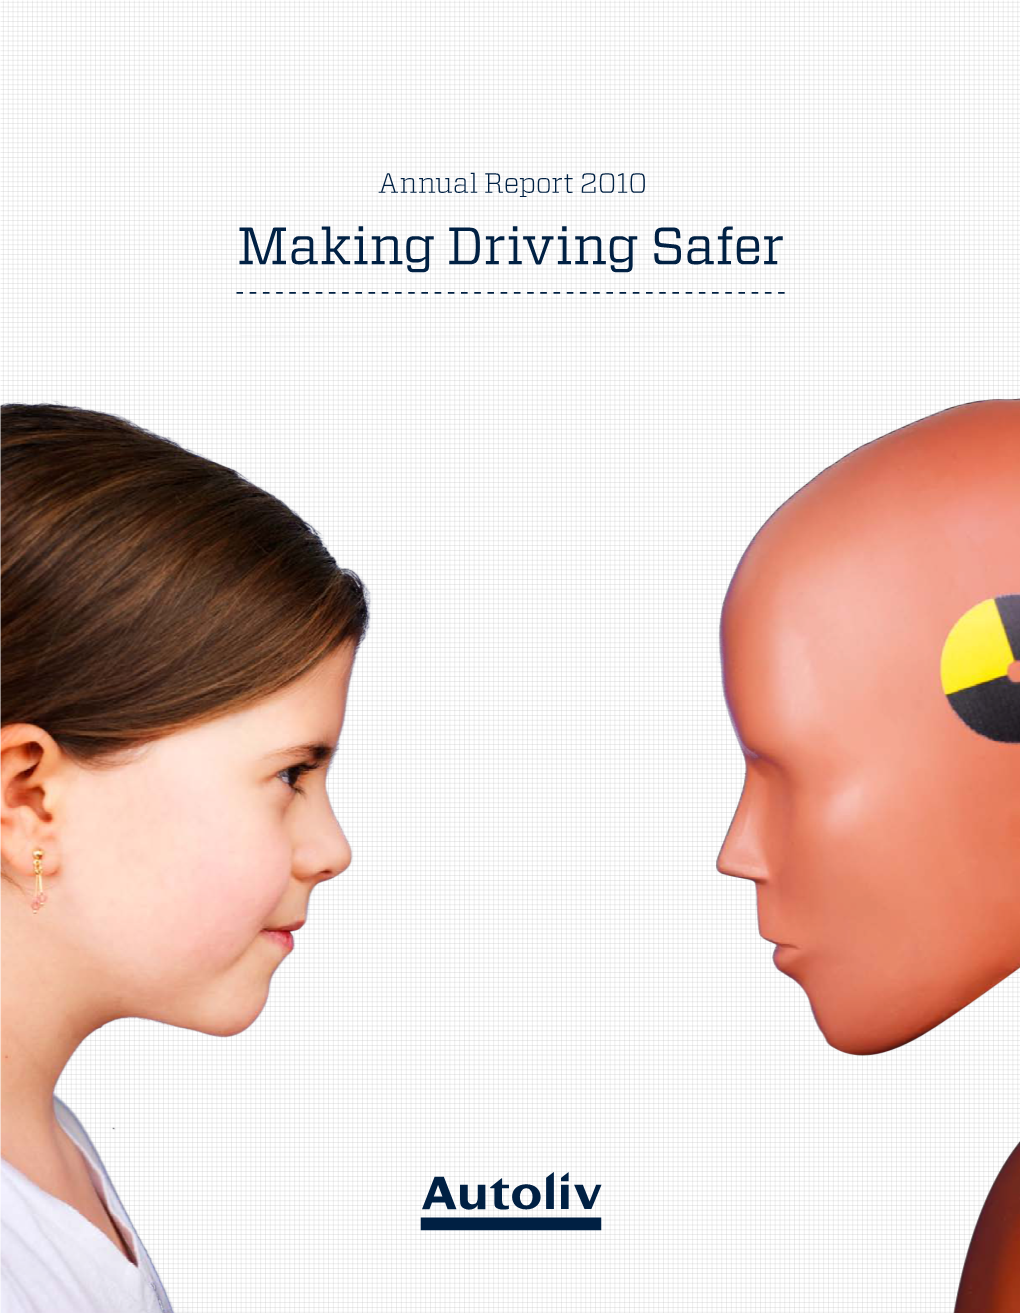 Making Driving Safer Content